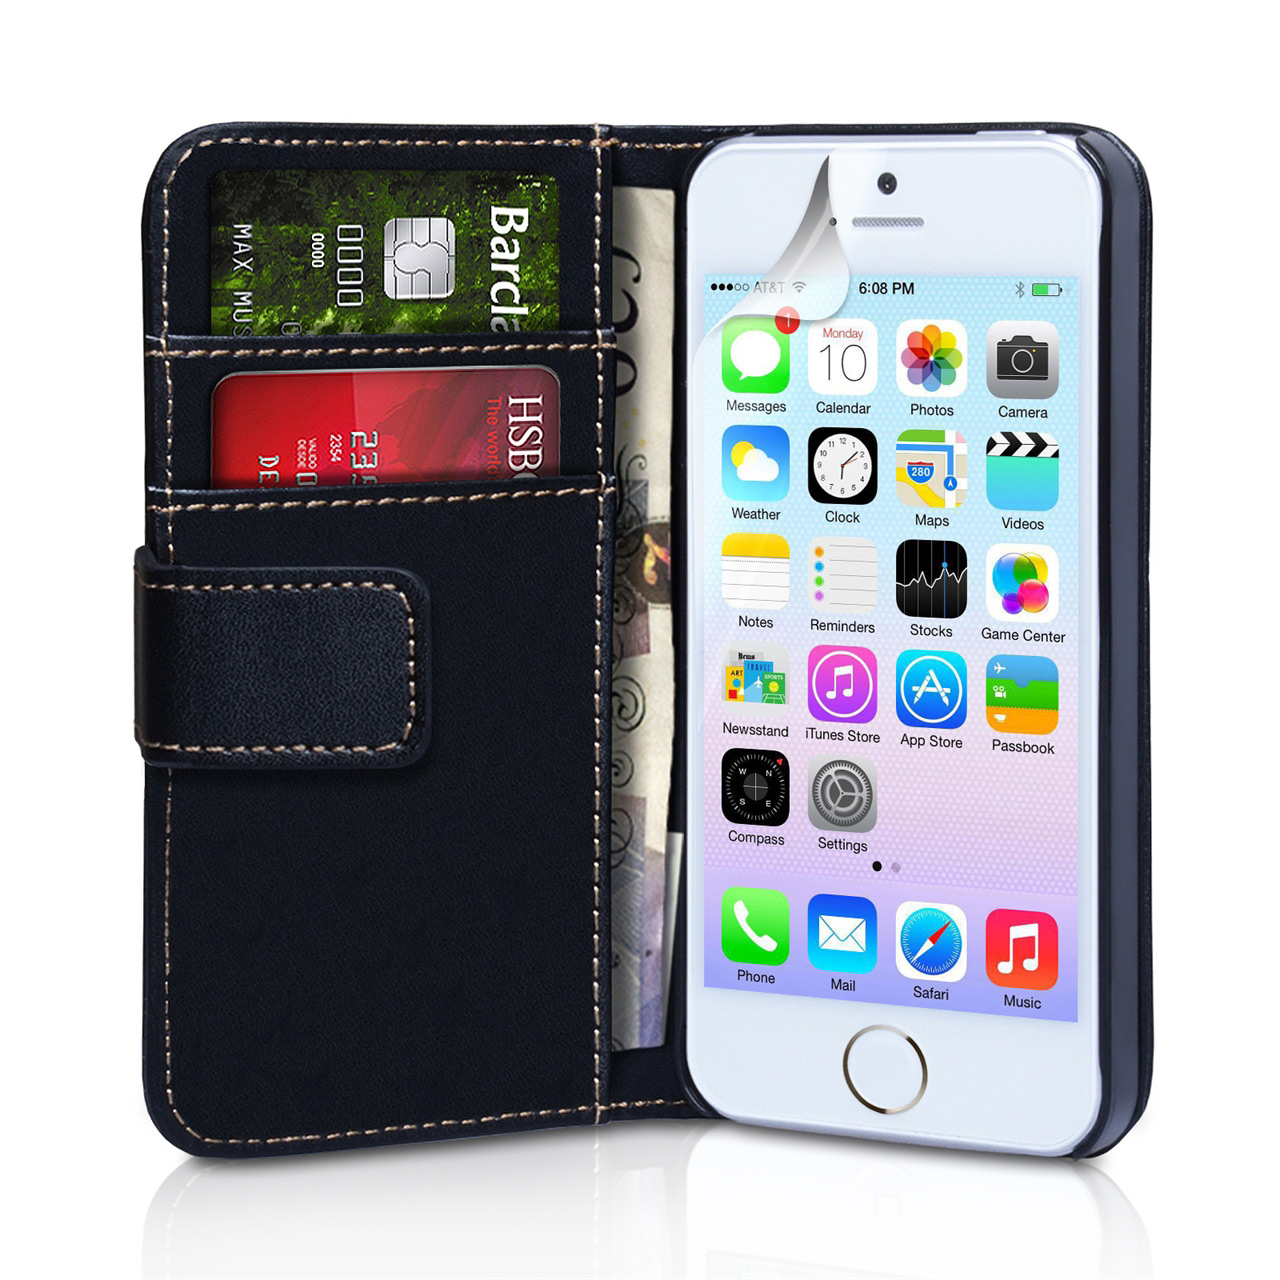 YouSave Accessories iPhone 5 and 5s Leather-Effect Wallet Case - Black